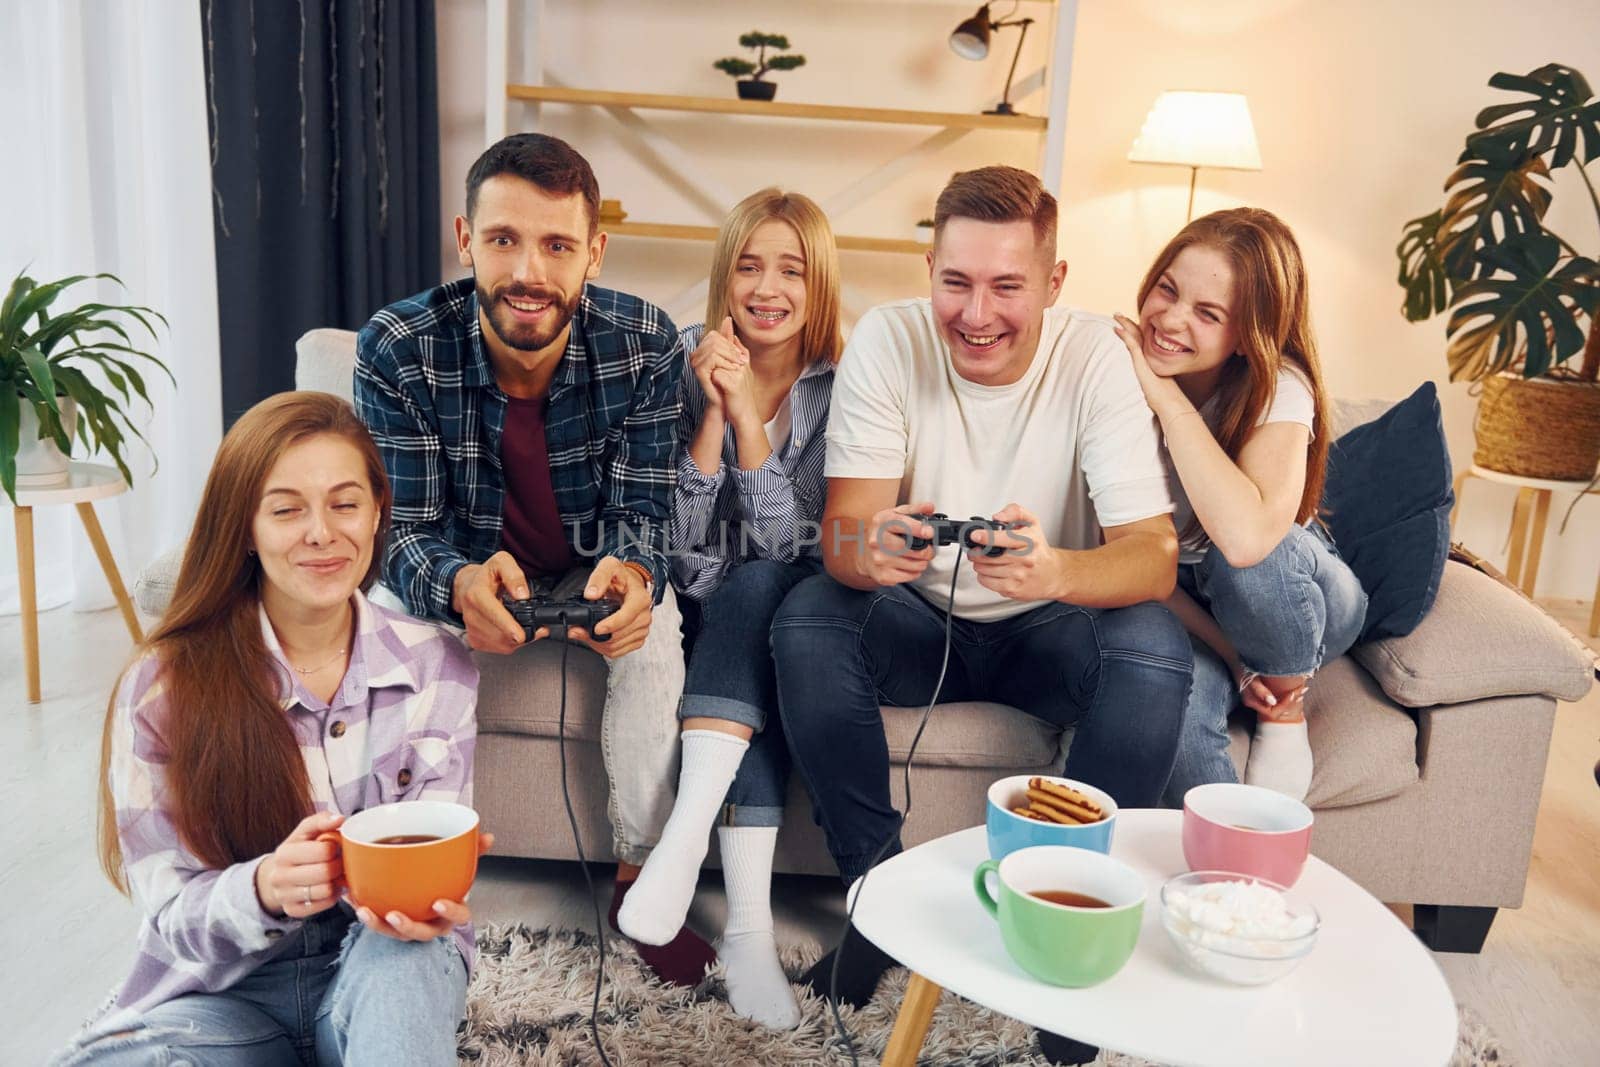 Using joysticks to play video game. Group of friends have party indoors together.